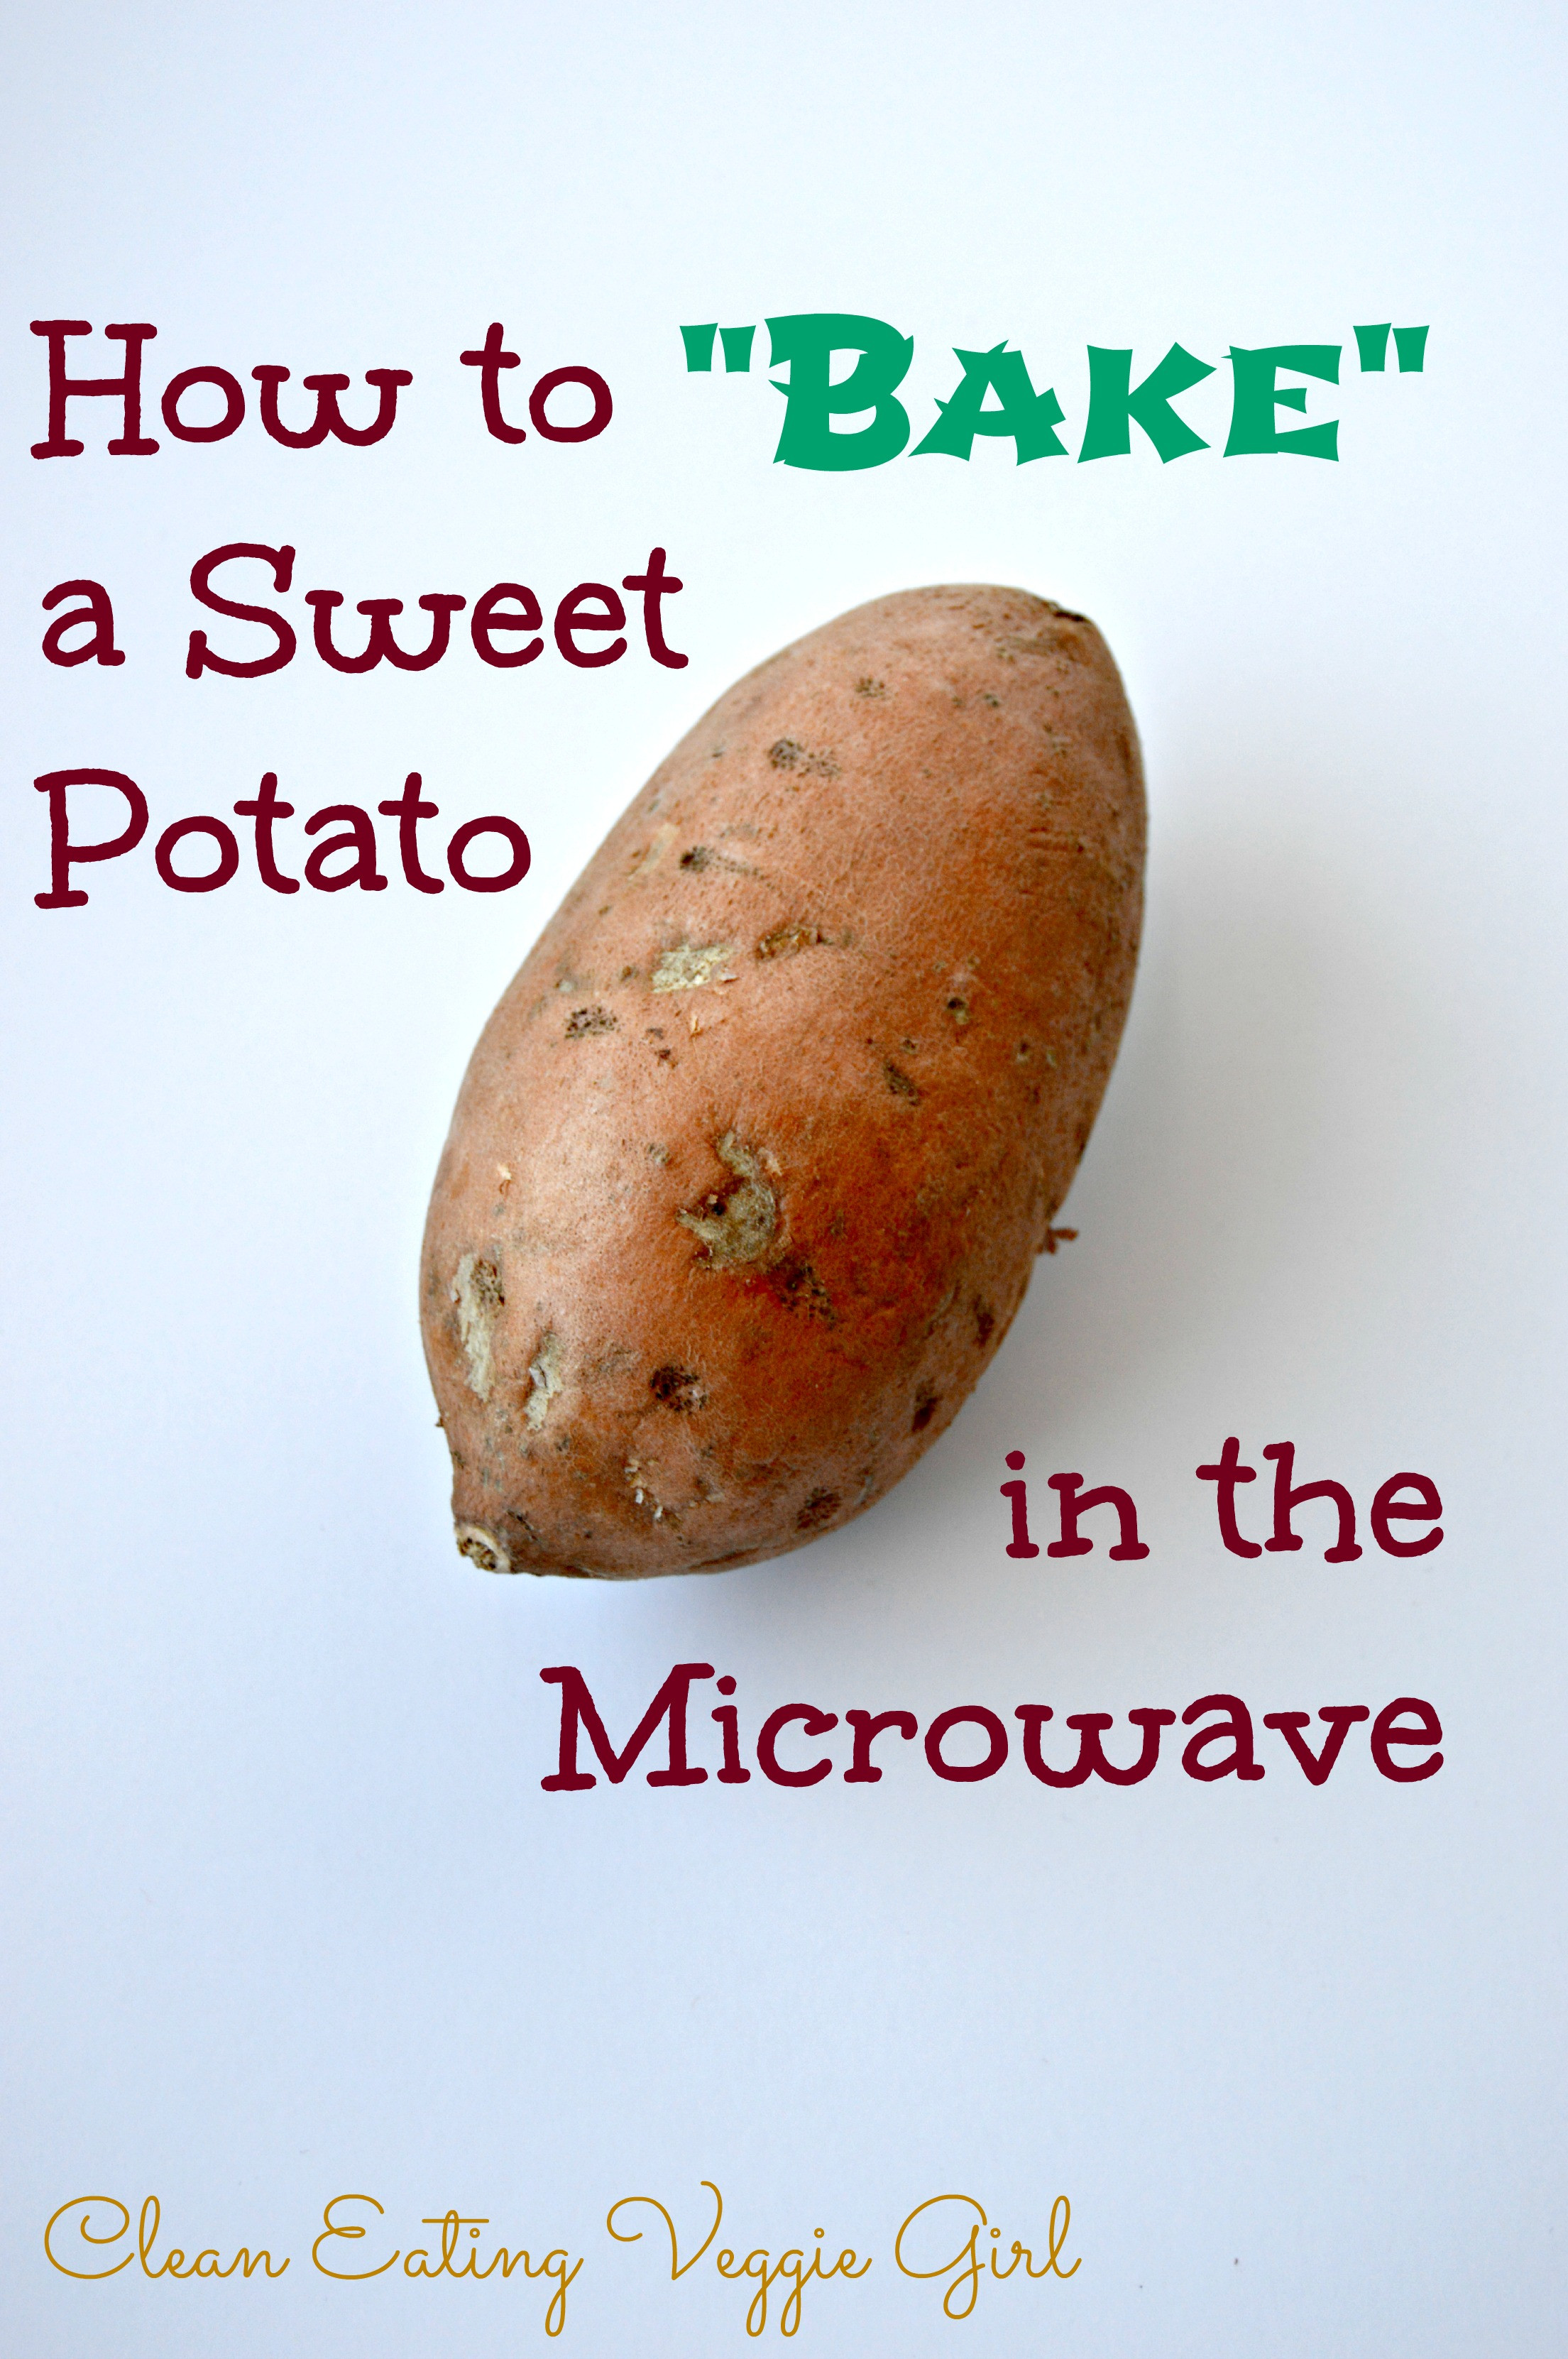 How To Bake A Potato In Microwave
 How to Make a Baked Sweet Potato in the Microwave Clean